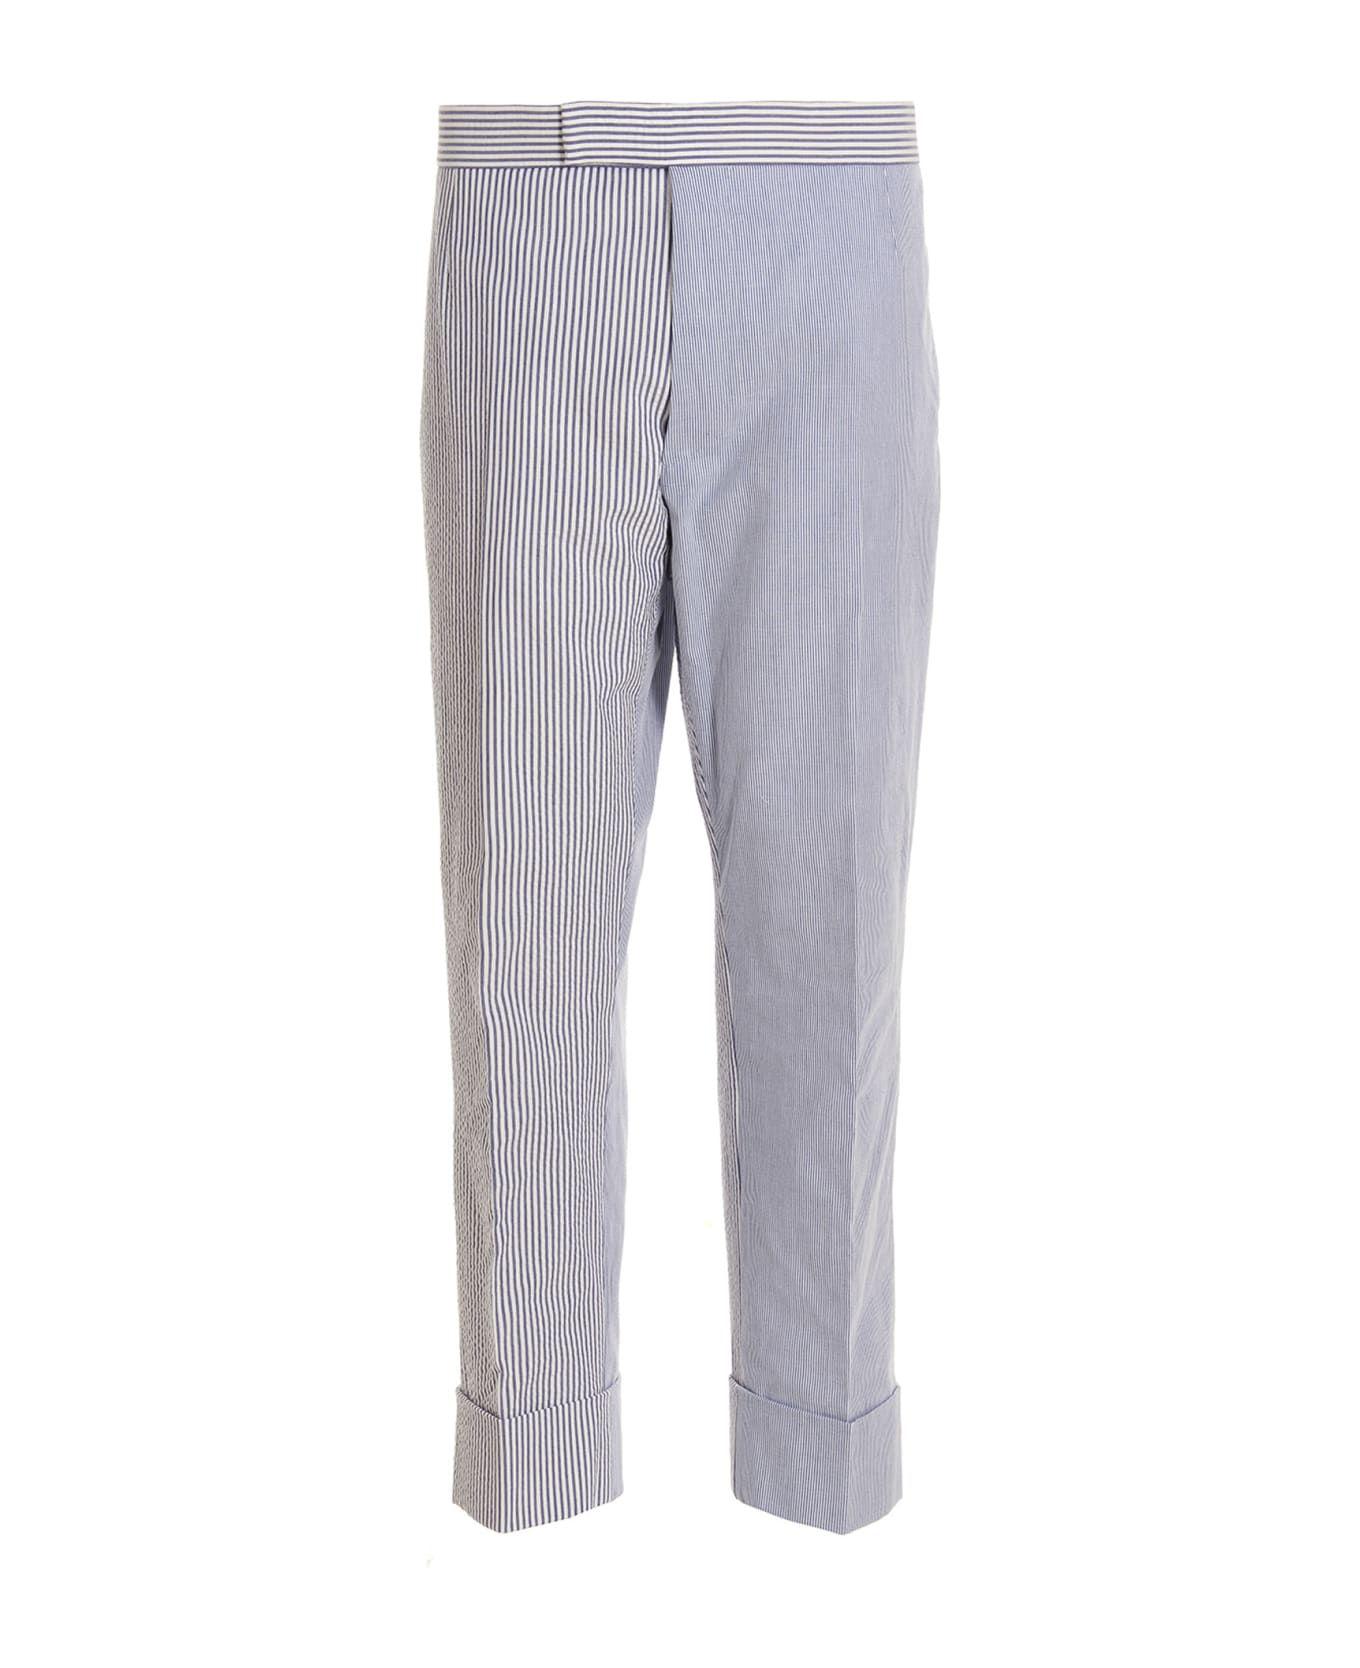 Thom Browne Striped Trousers - Light Blue